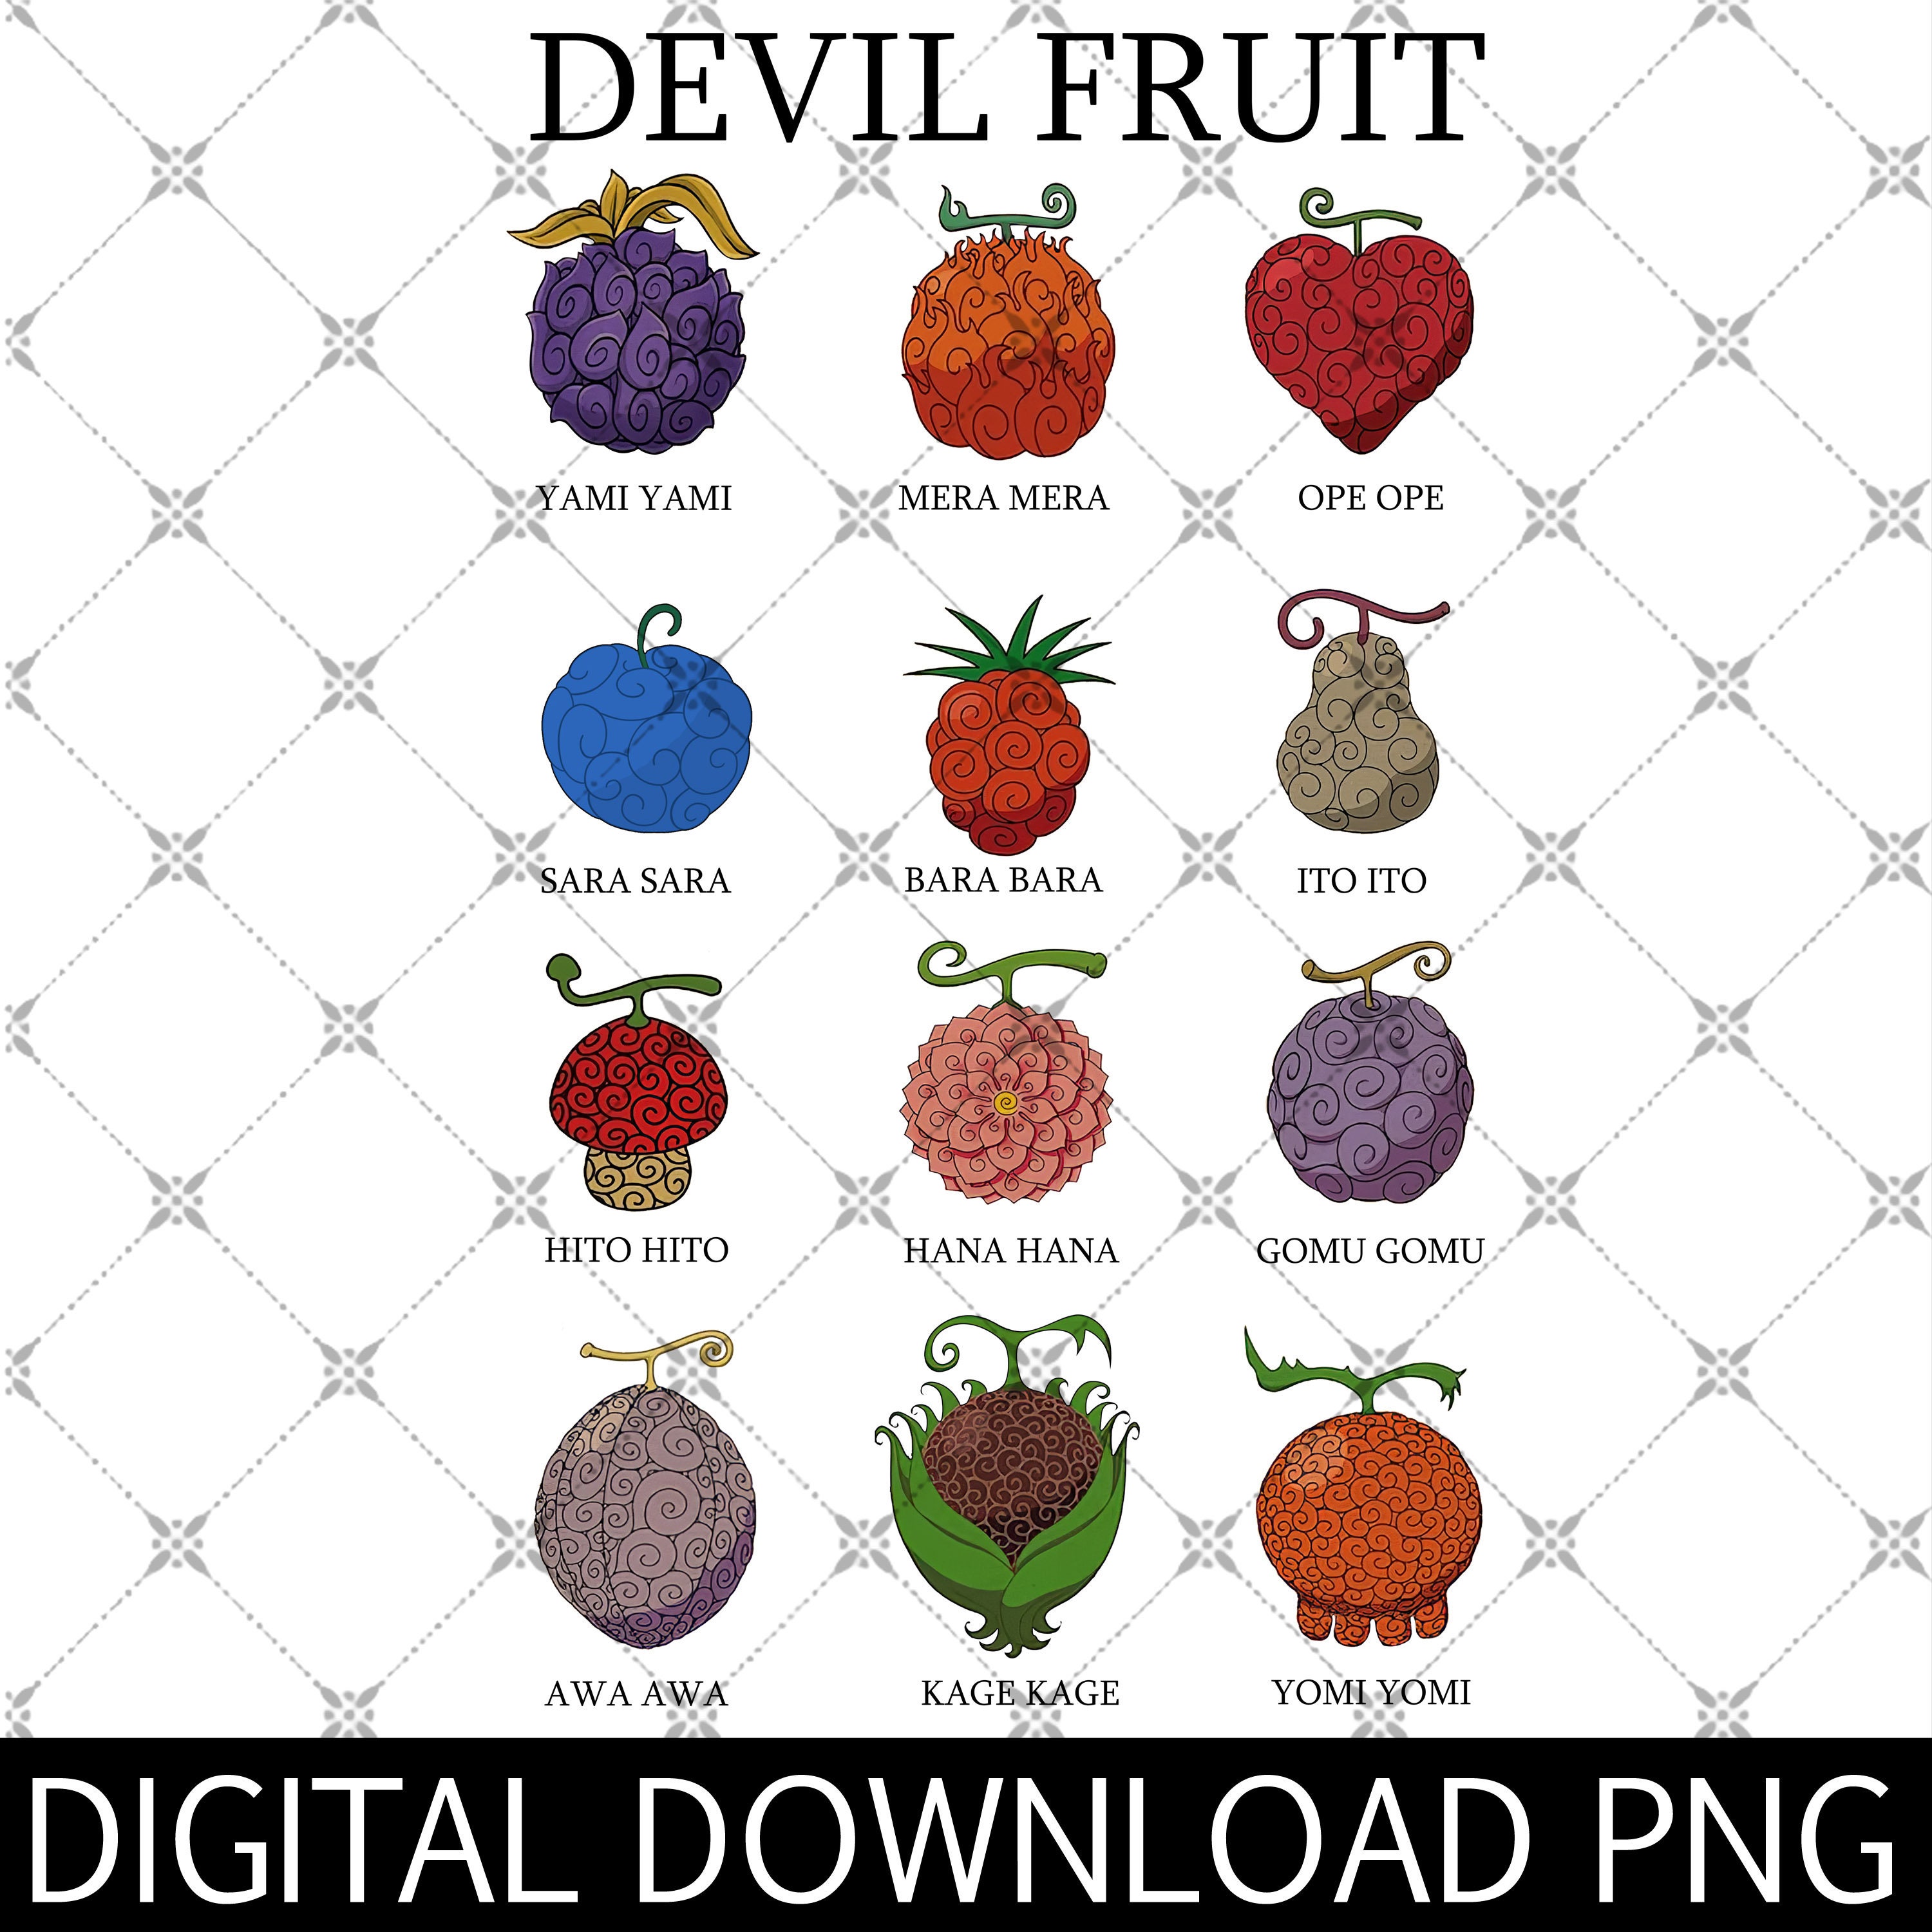 The Yomi Yomi no Mi and the Kage Kage no mi in their fruit forms